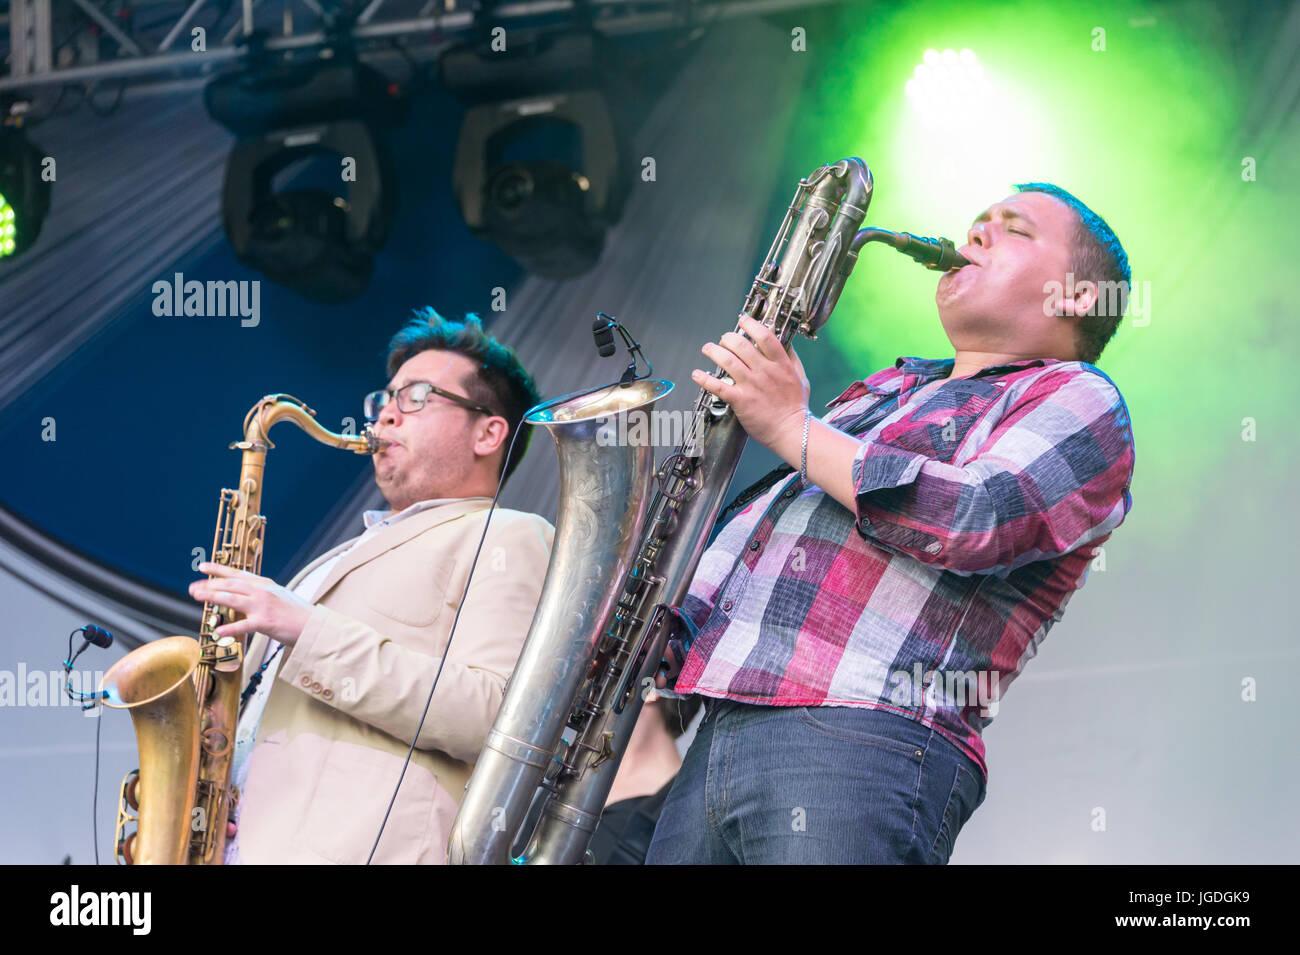 Montreal, 4 July 2017: Fuel Junkie on stage at Montreal Jazz Festival Stock Photo